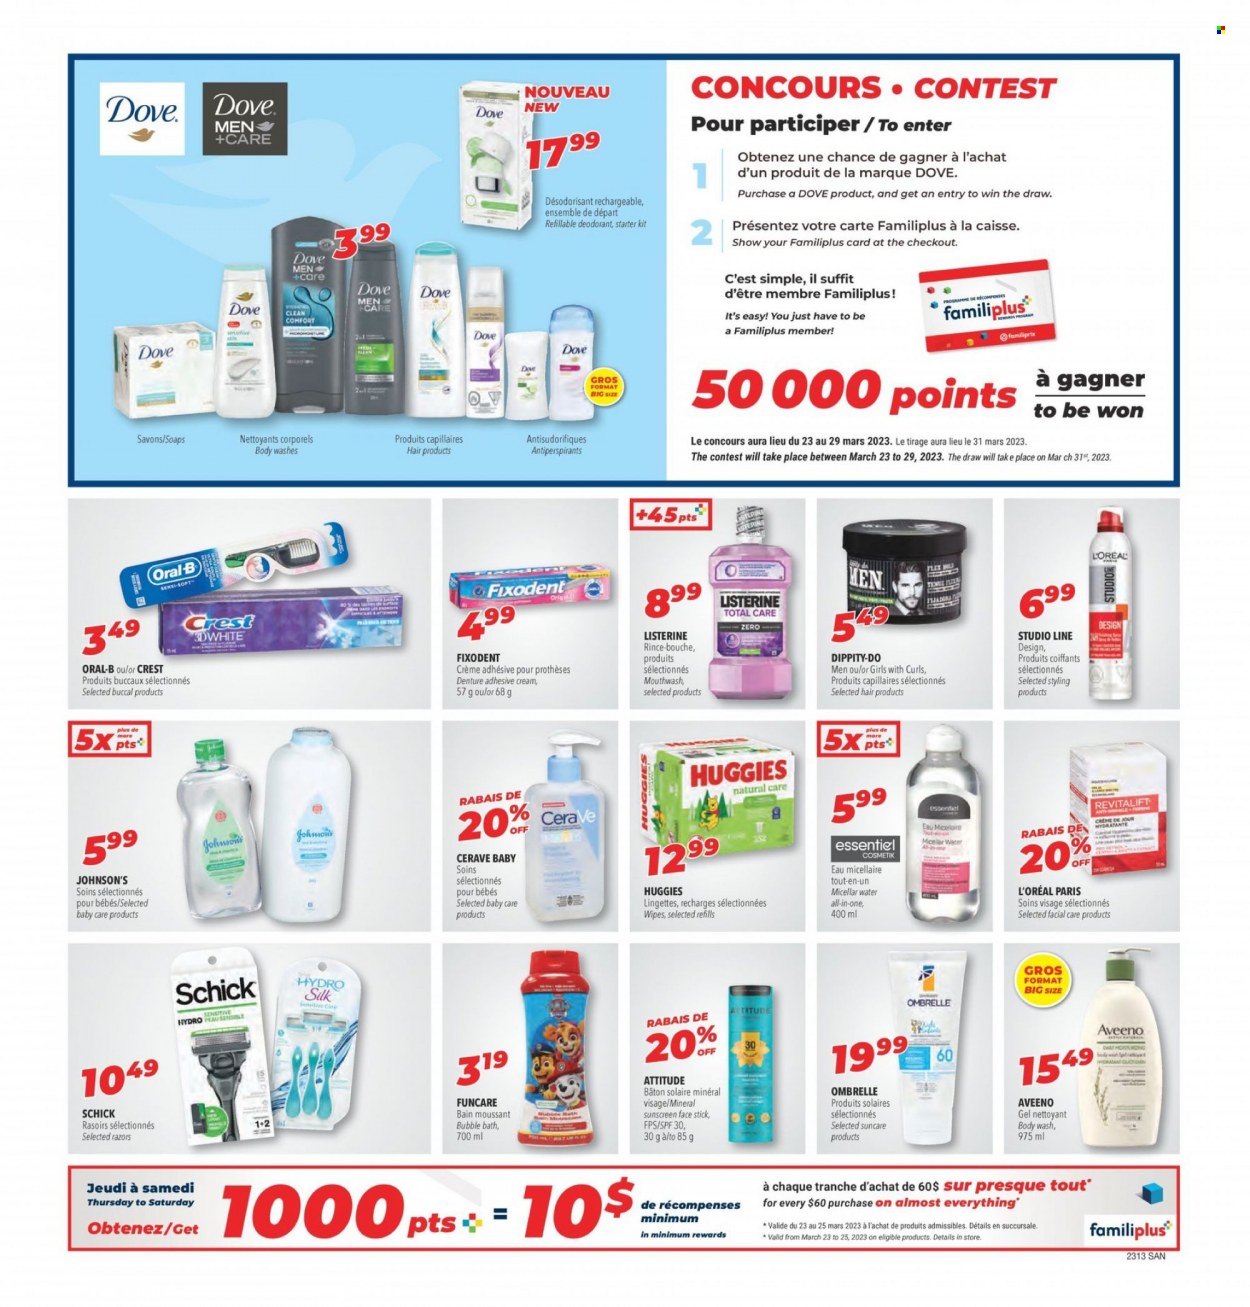 thumbnail - Familiprix Santé Flyer - March 23, 2023 - March 29, 2023 - Sales products - Dove, Mars, water, wipes, Johnson's, Aveeno, body wash, bubble bath, hair products, mouthwash, Fixodent, Crest, CeraVe, L’Oréal, micellar water, anti-perspirant, Schick, Listerine, Huggies, Oral-B, deodorant. Page 5.